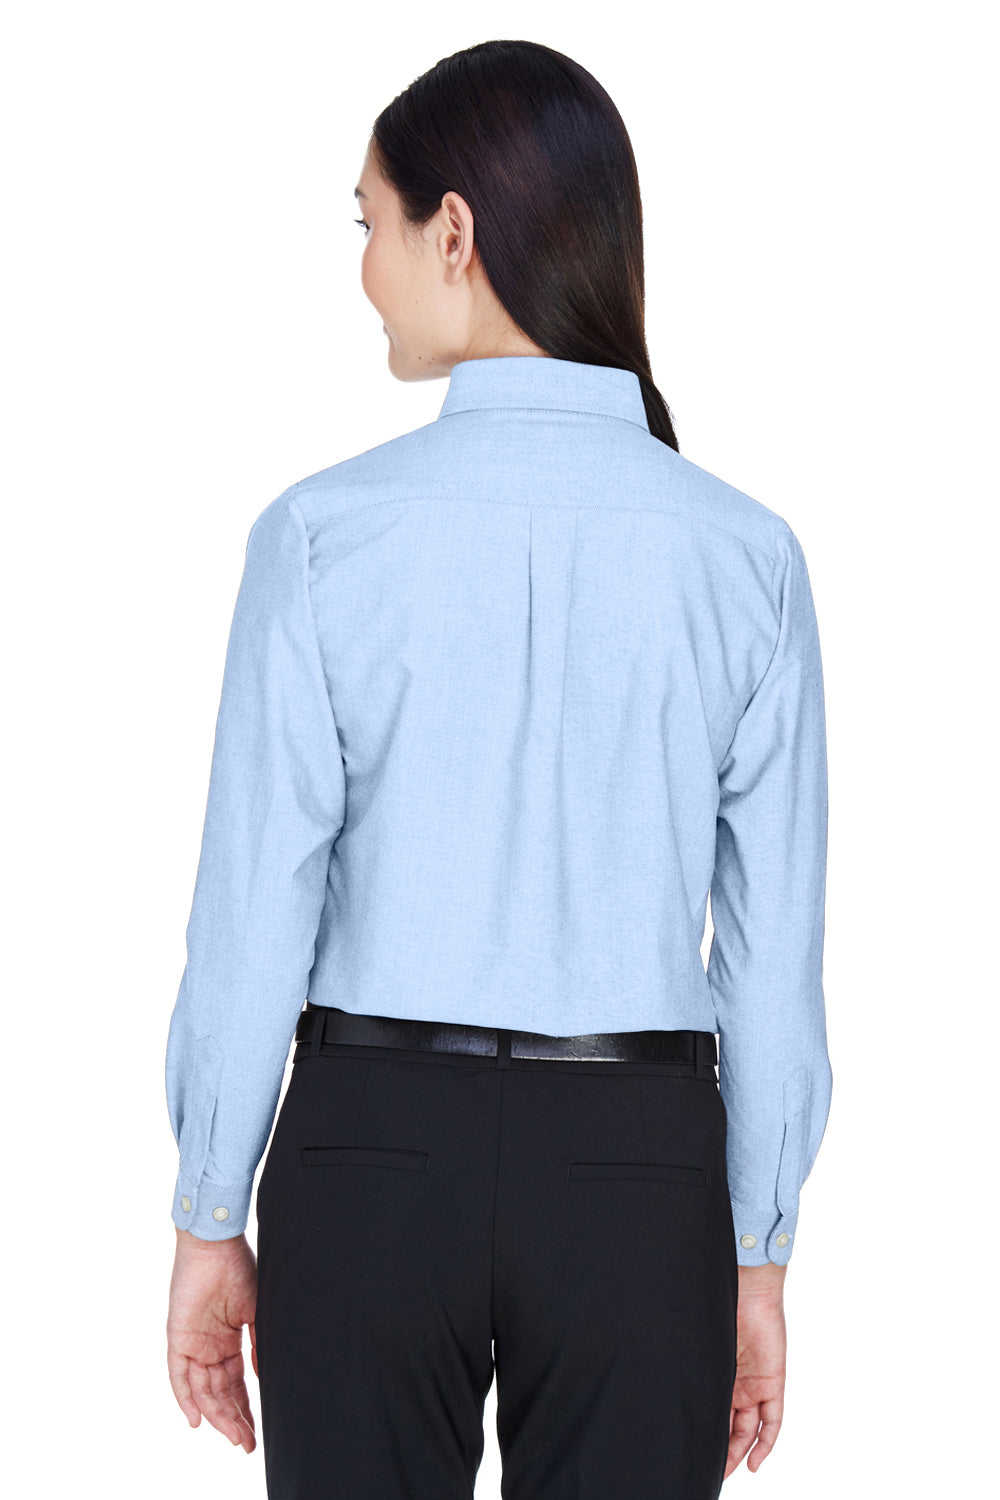 UltraClub 8990 Womens Classic Oxford Wrinkle Resistant Long Sleeve Button Down Shirt w/ Pocket Light Blue Back